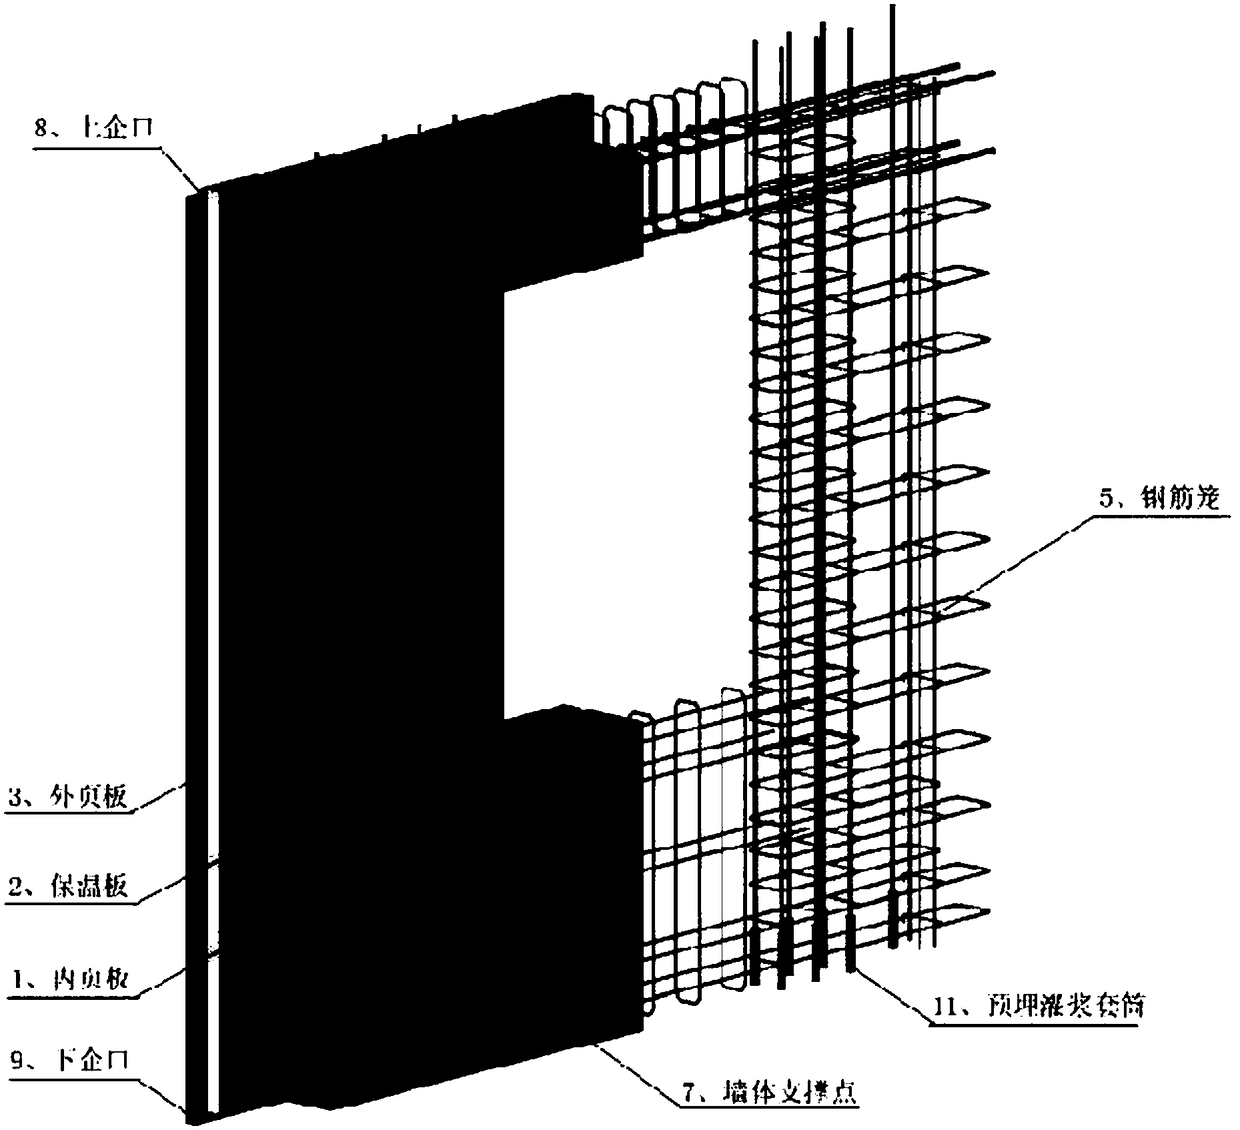 Prefabricated assembled concrete wall plate for assembled structures